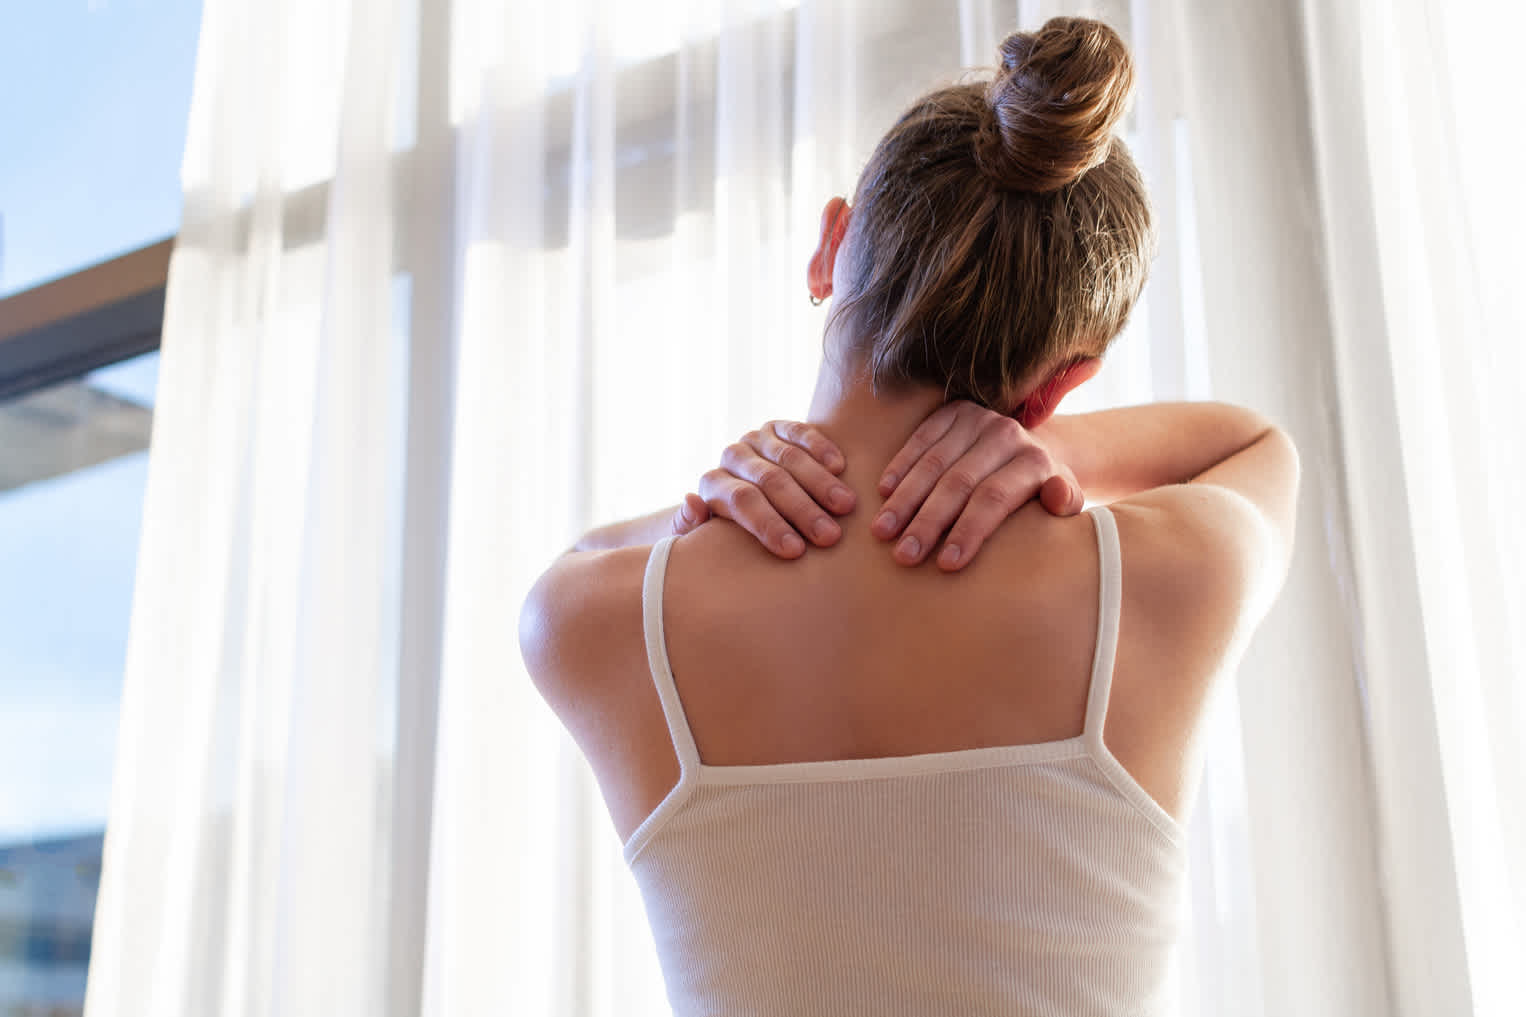 Everything You Need to Know About Upper Right Back Pain and Its